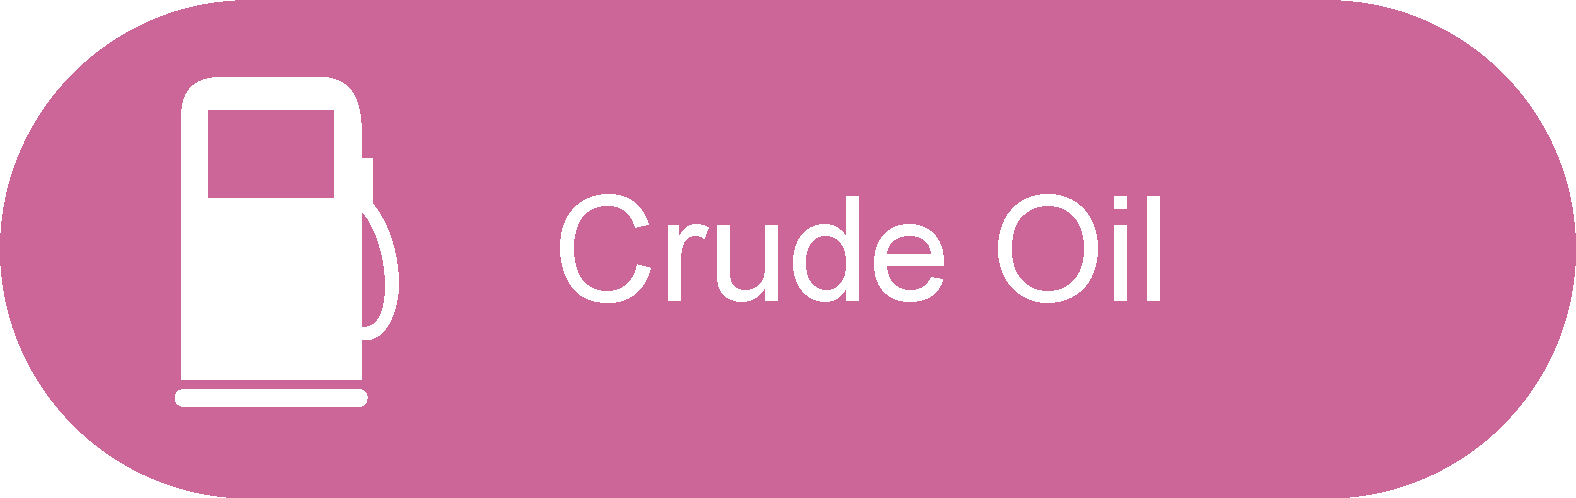 Energy Commodity Indicators – Crude Oil and Refined Petroleum Products